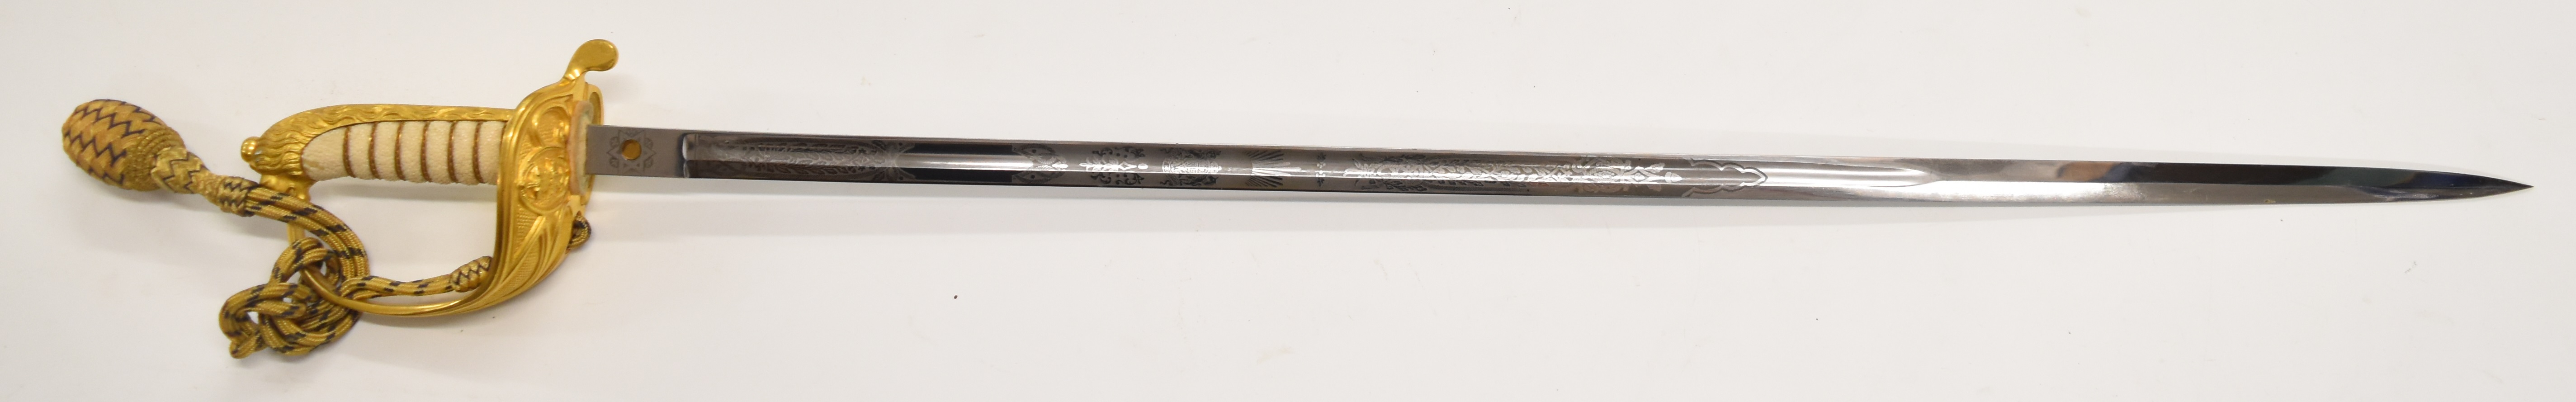 Royal Navy 1827 pattern officer's dress sword with lion head pommel, folding guard, fouled anchor - Image 3 of 10